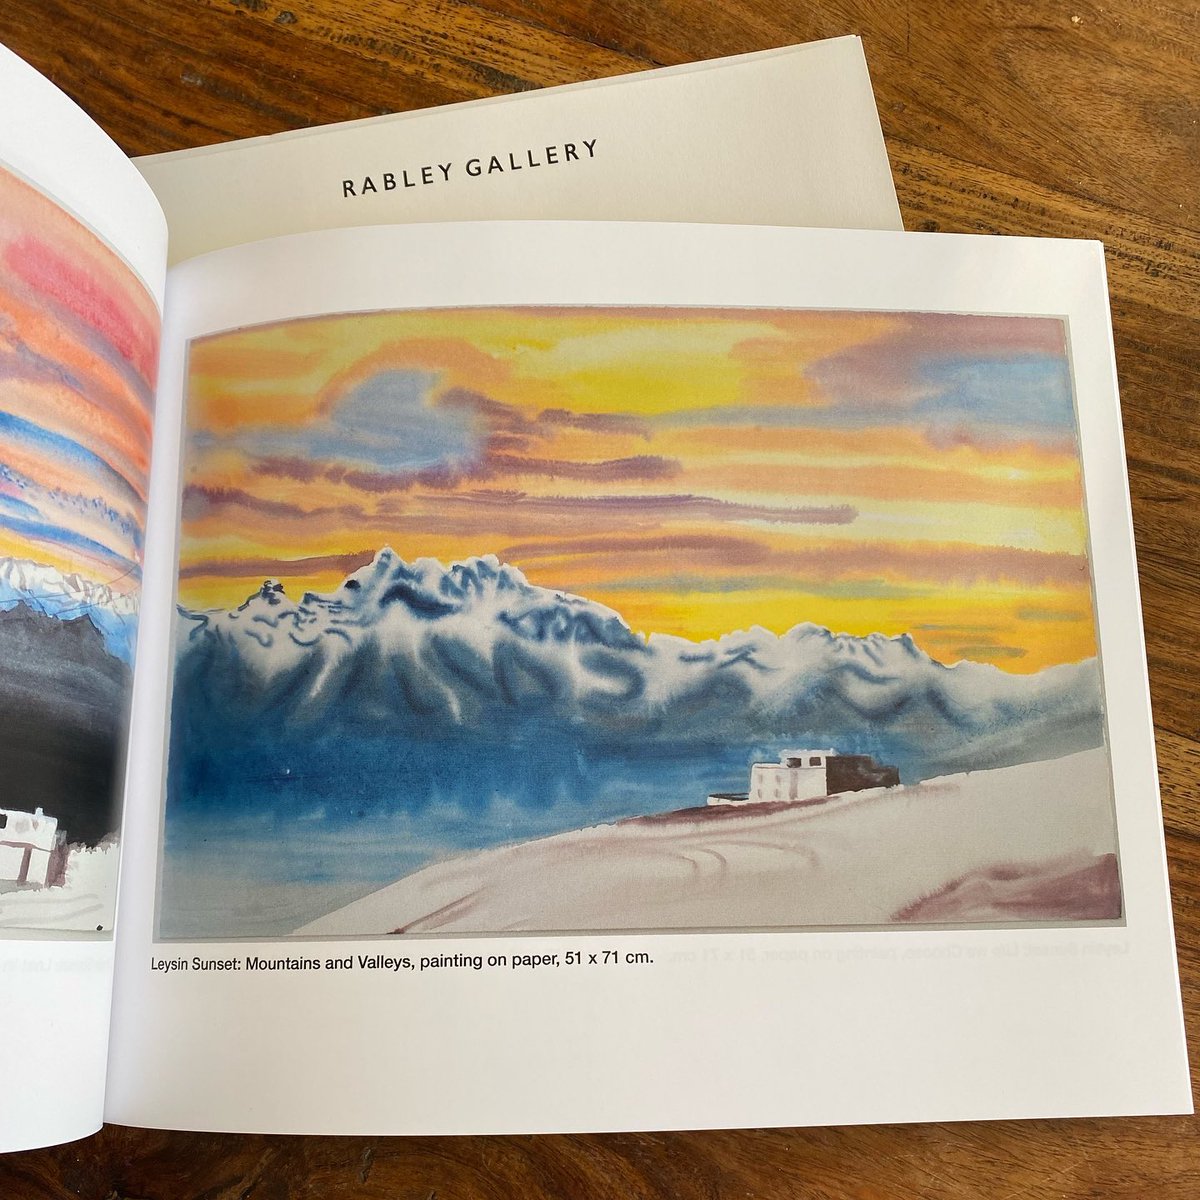 Ecstatically excited to have worked with international artist @sadie_tierney to produce an art historical response to her new body of work, featuring in the catalogue to accompany her latest solo show. ‘The Mountains Are Calling’ is open to visit now @RableyGallery